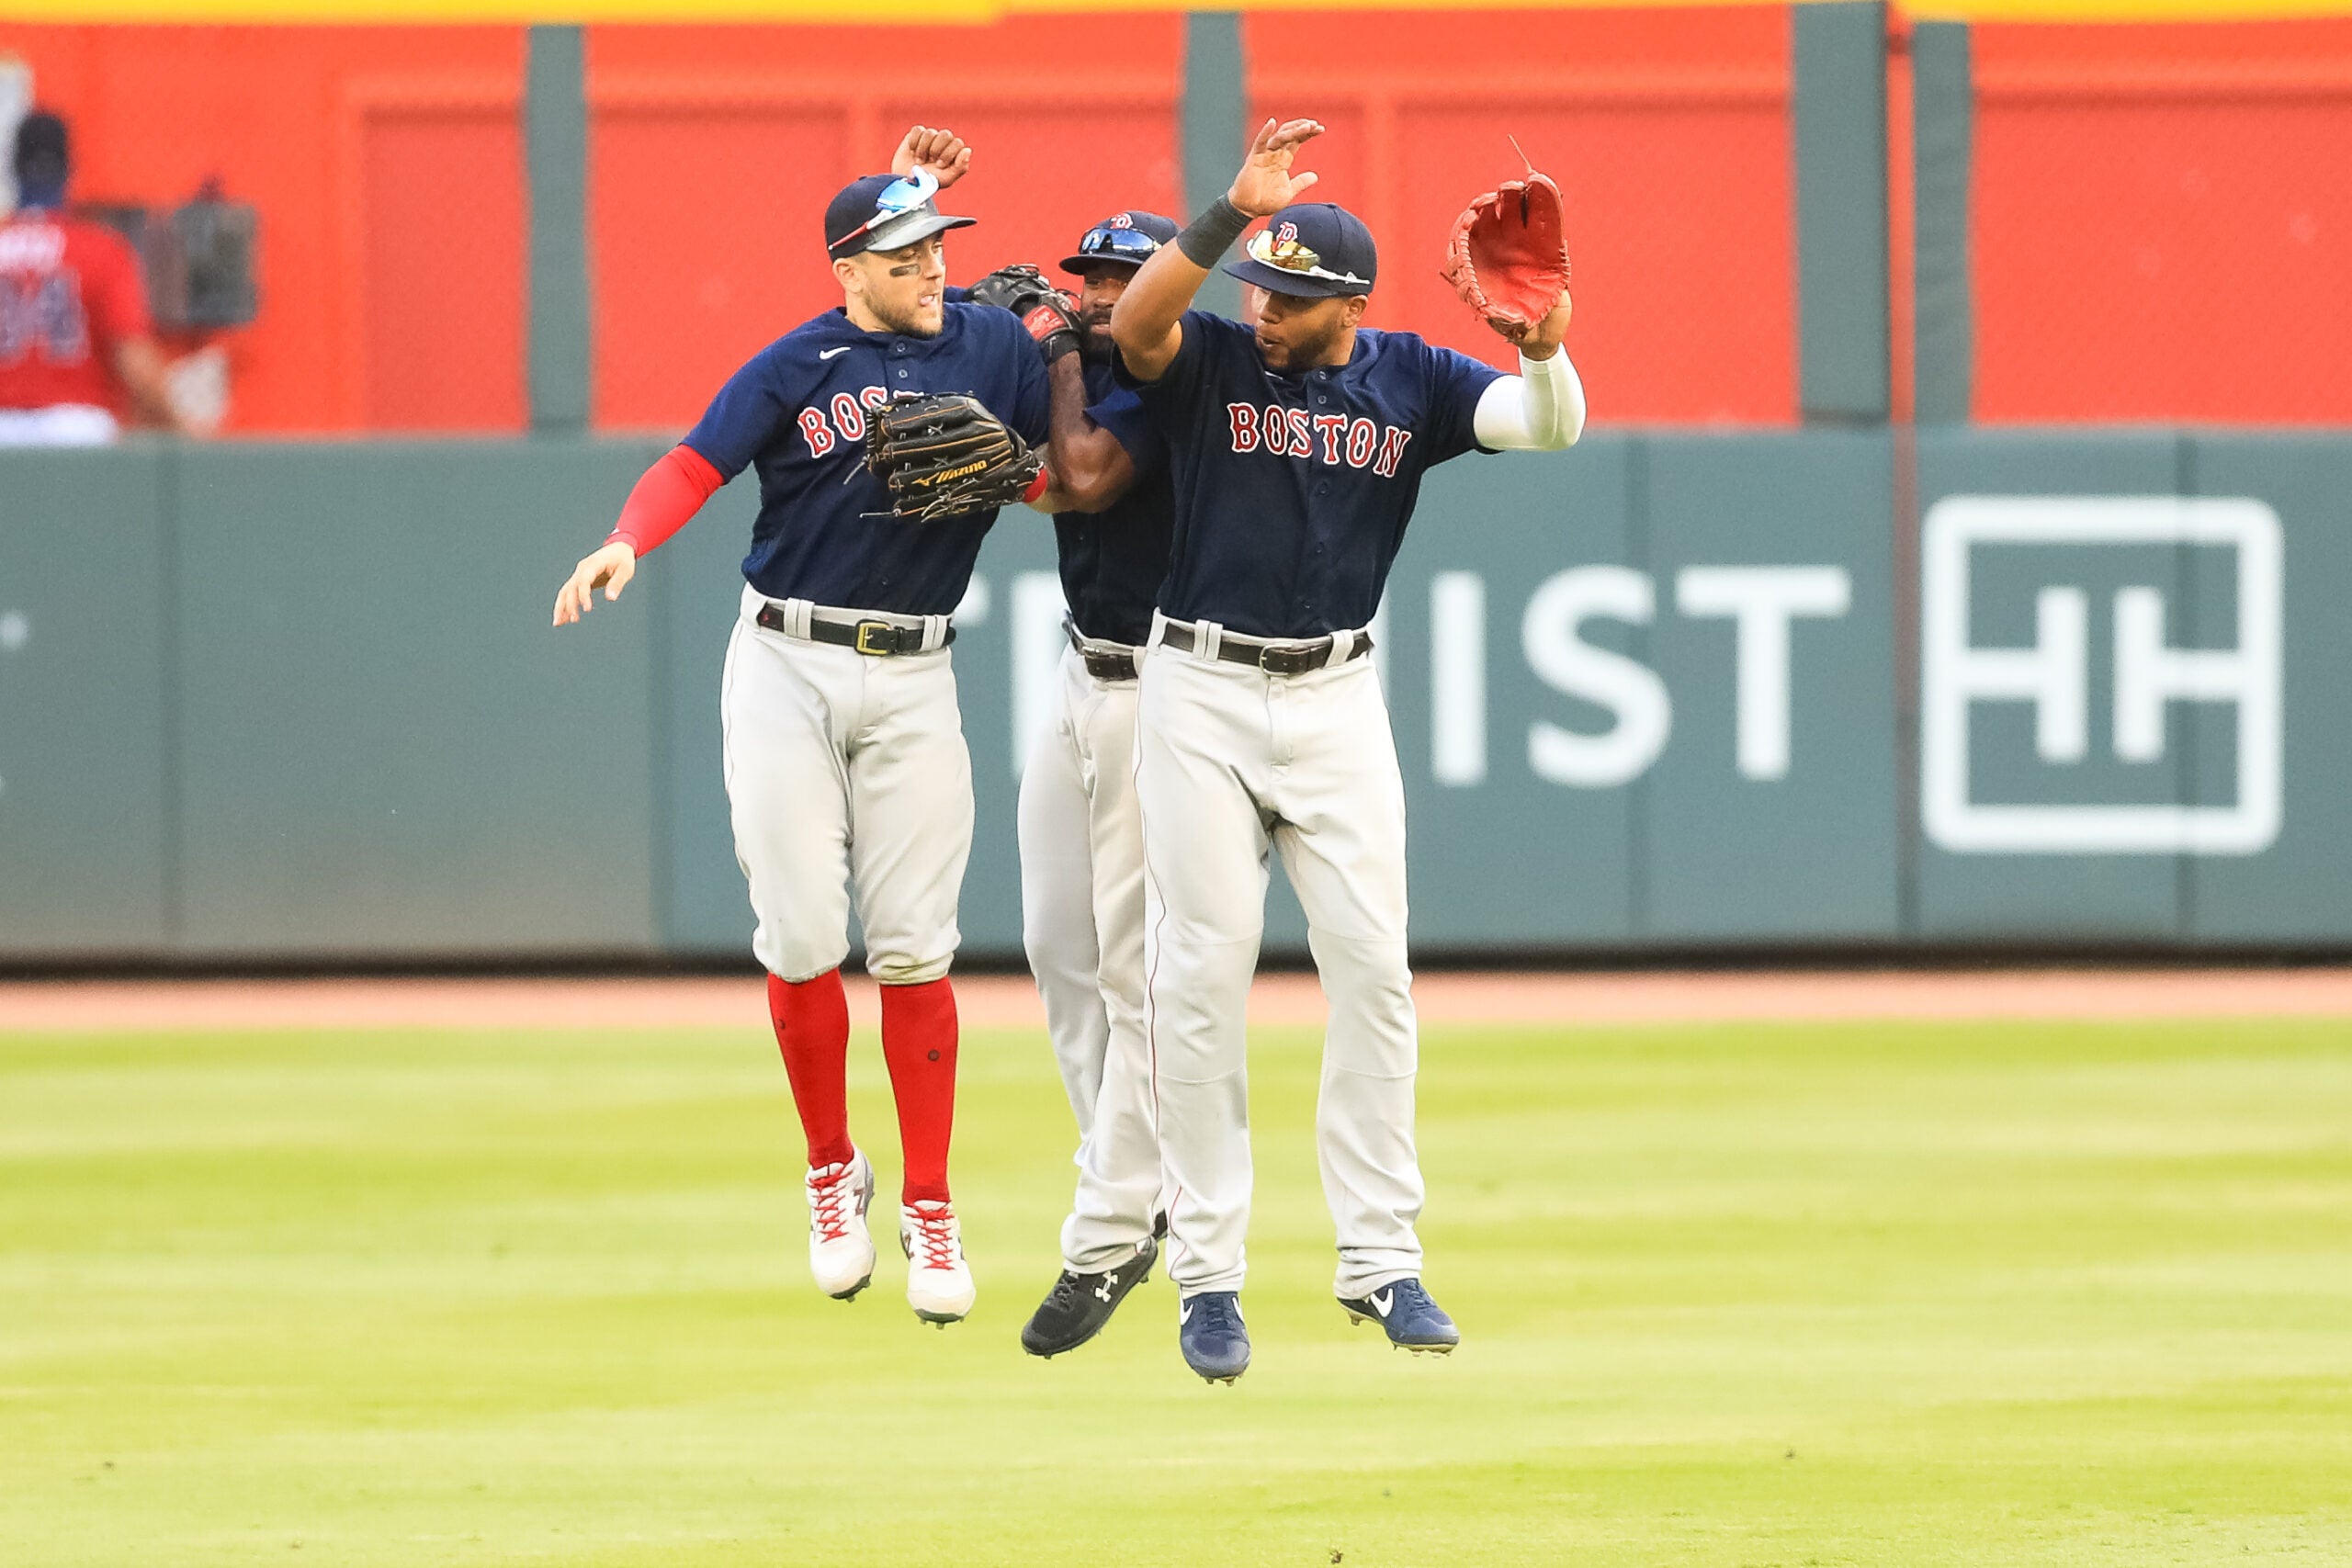 Jackie Bradley Jr., Boston Red Sox CF: 'Everyone says go the other